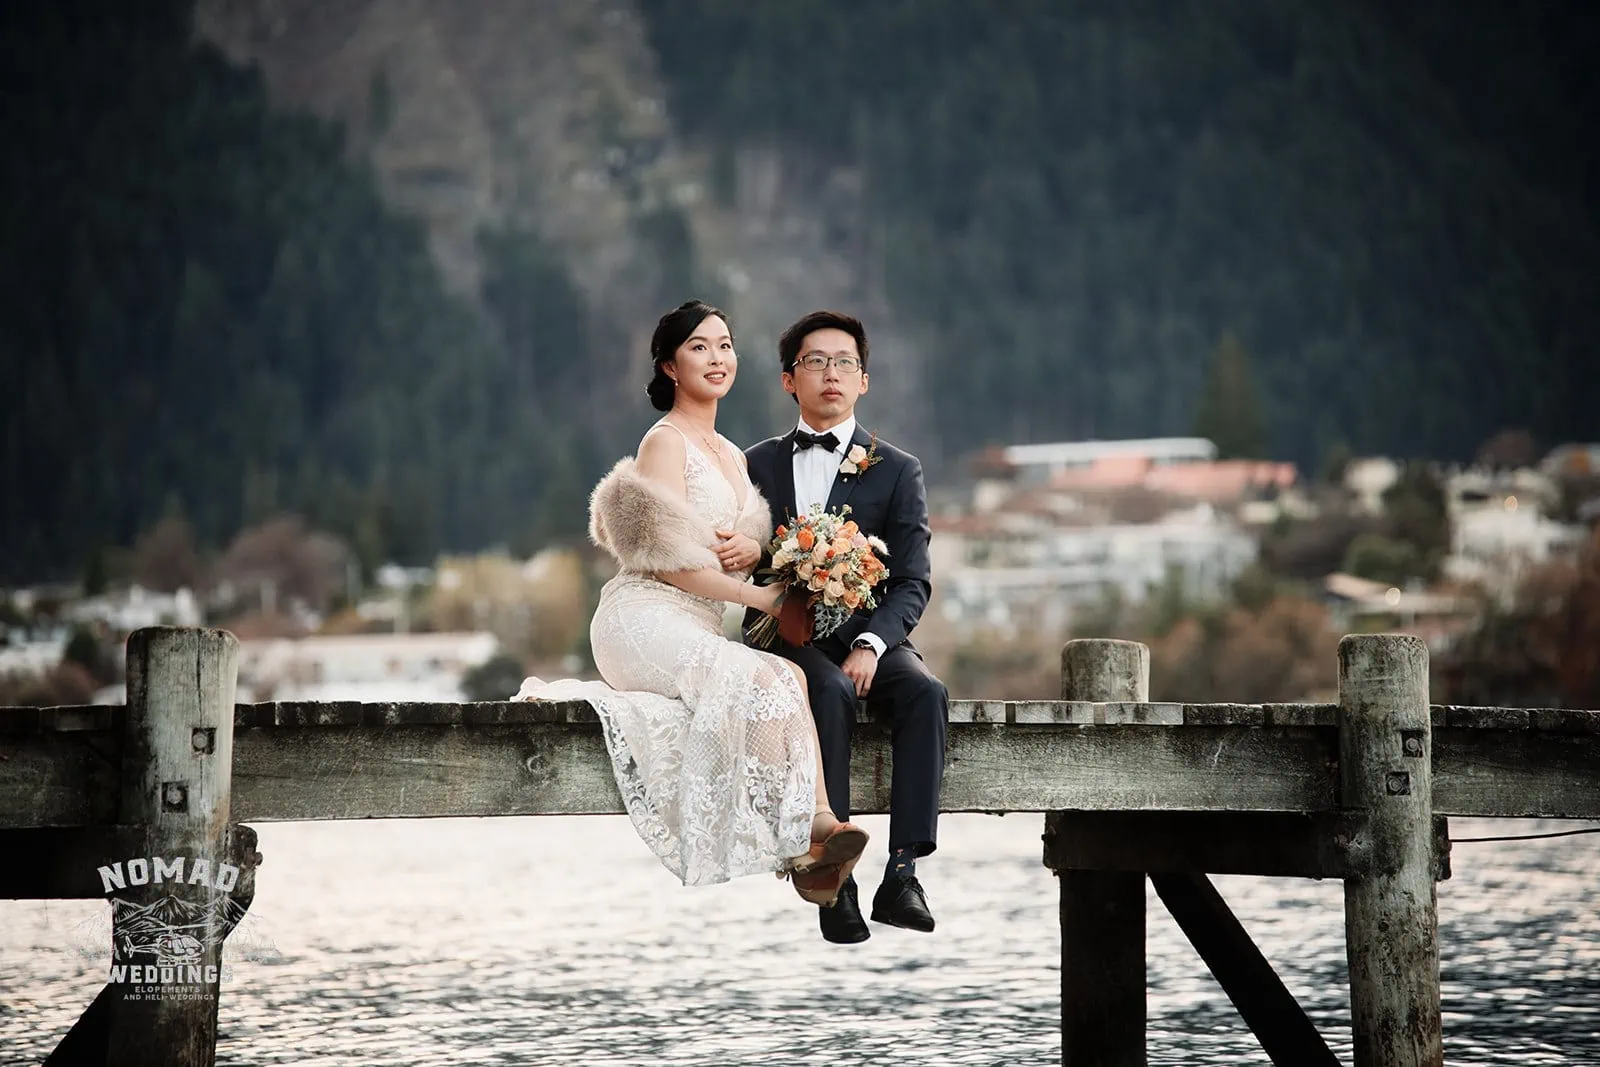 Joanna and Tony's pre-wedding shoot in Queenstown, New Zealand, featuring a bride and groom sitting on a pier with mountains in the background.